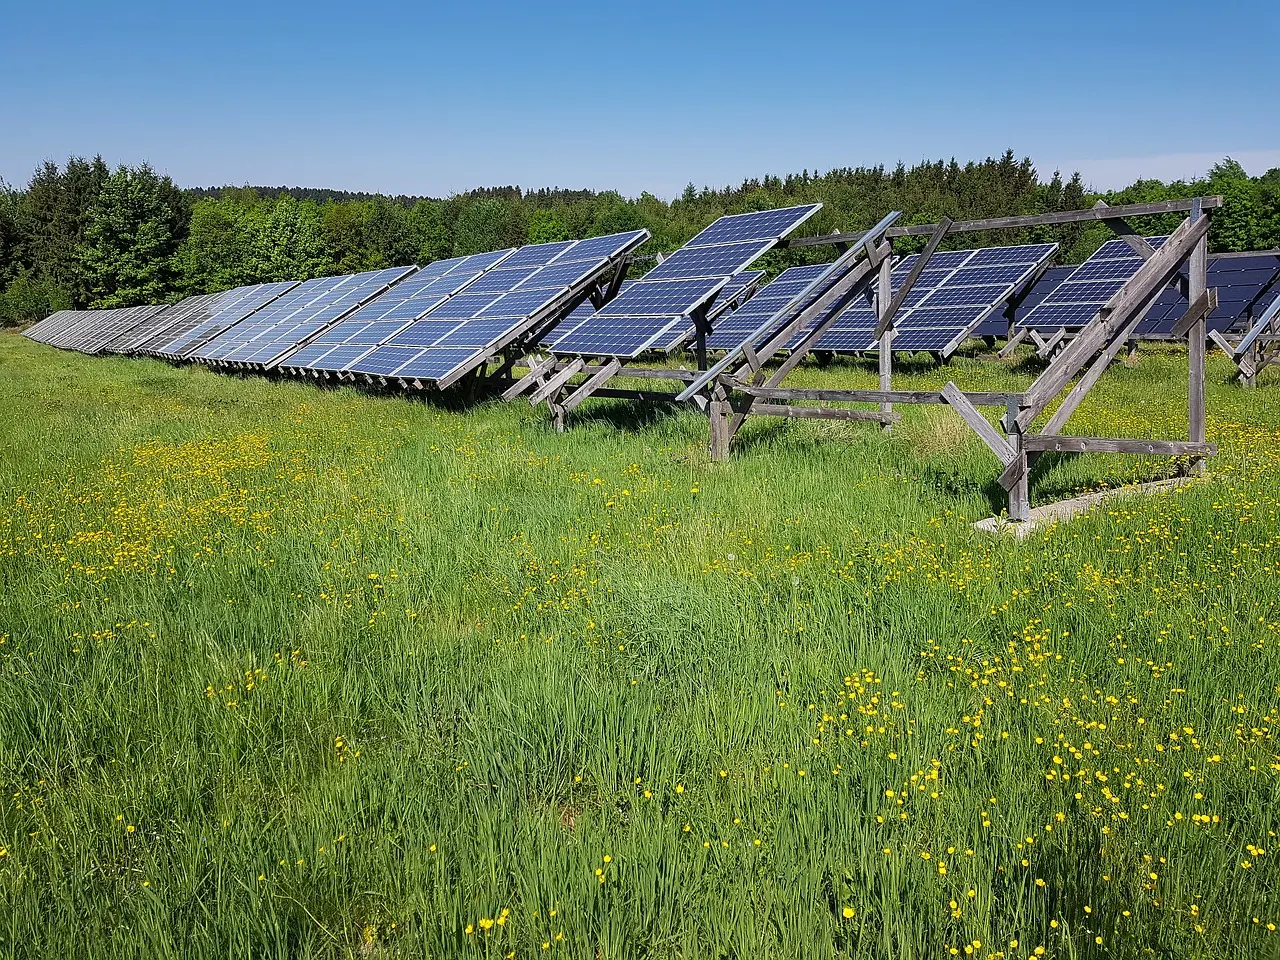 solar energy in agriculture - What are the benefits of AgriSolar